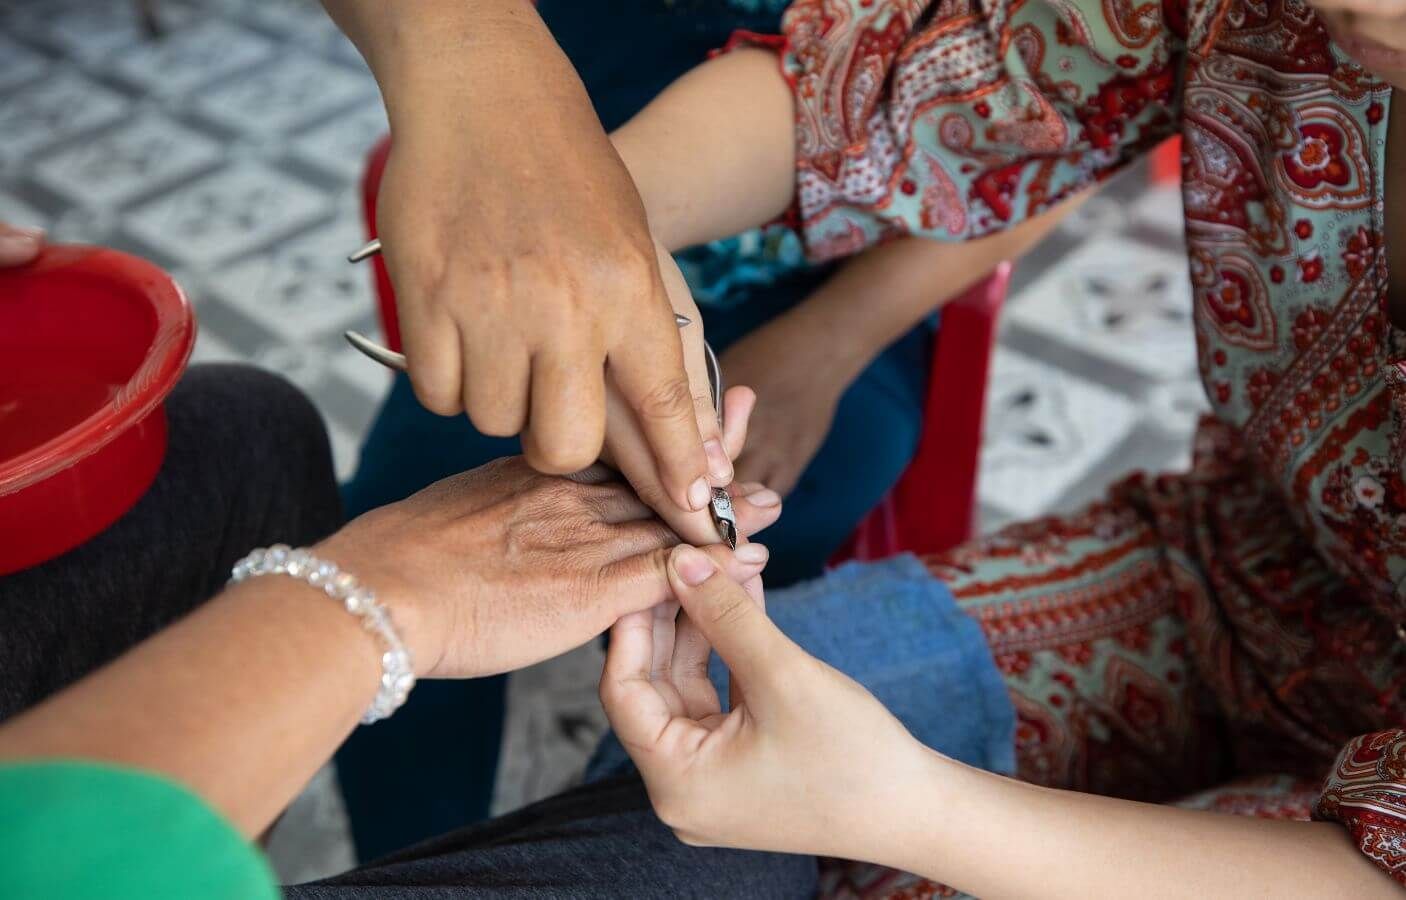 A salon owner guides Ngan on how to care for nails during her vocational training.